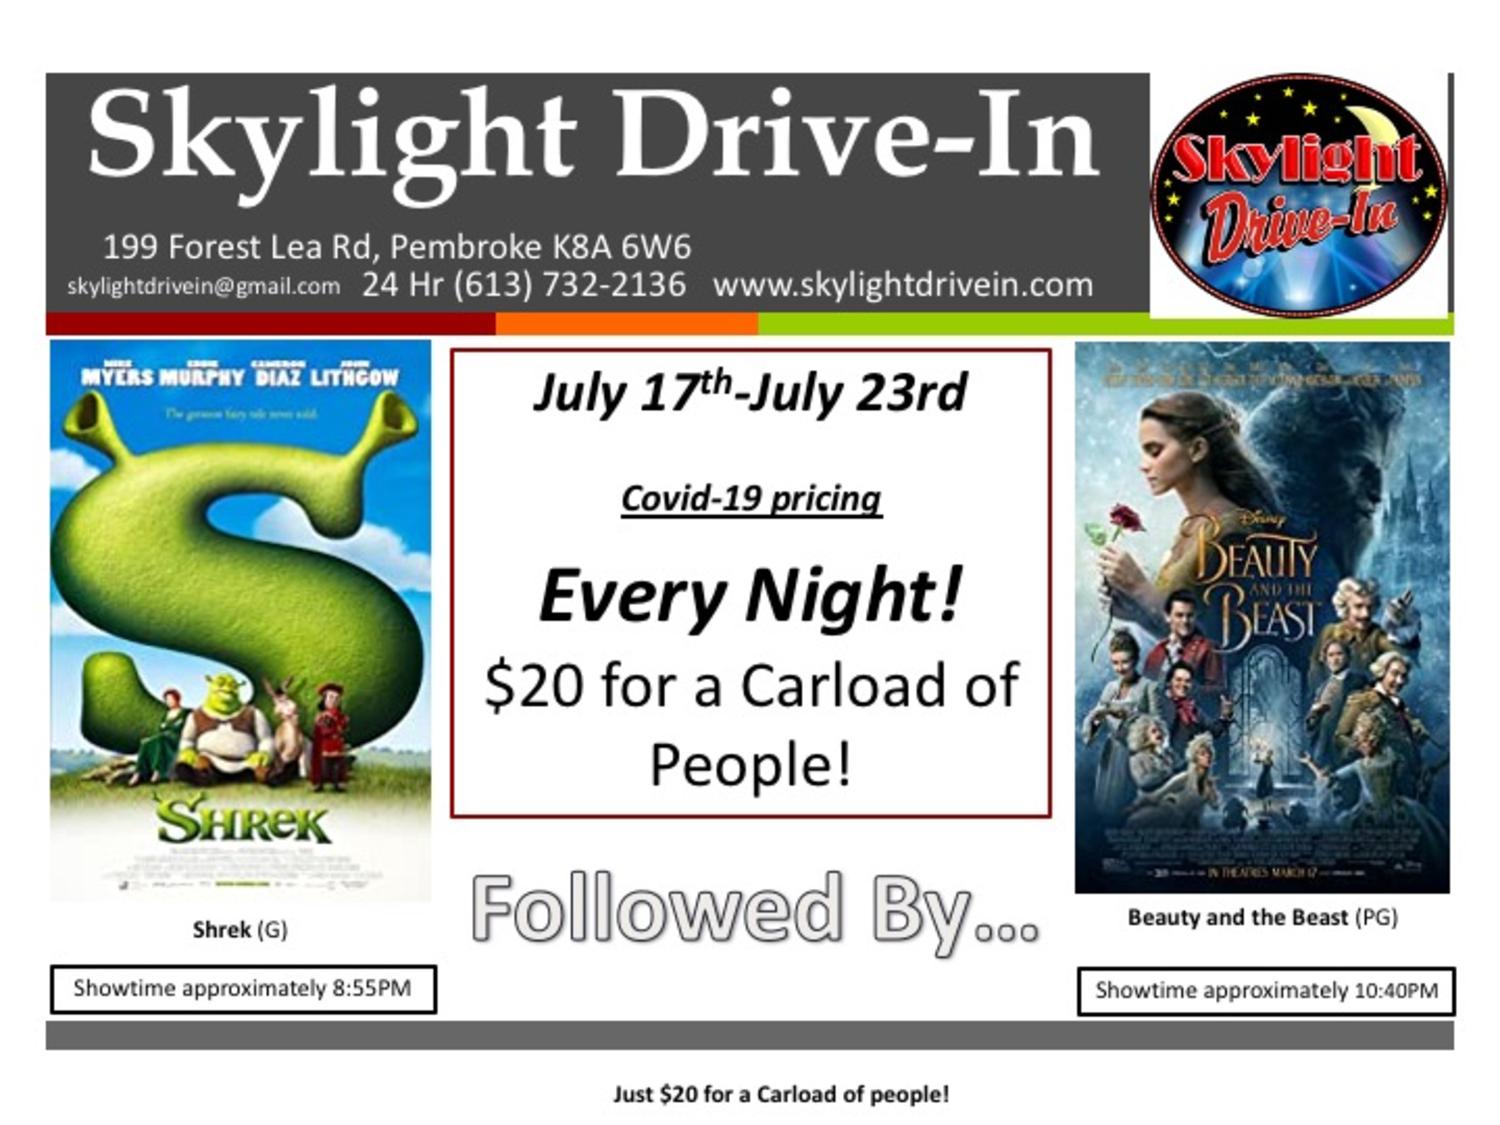 Skylight Drive-In featuring Shrek followed by Disney's Beauty And The Beast